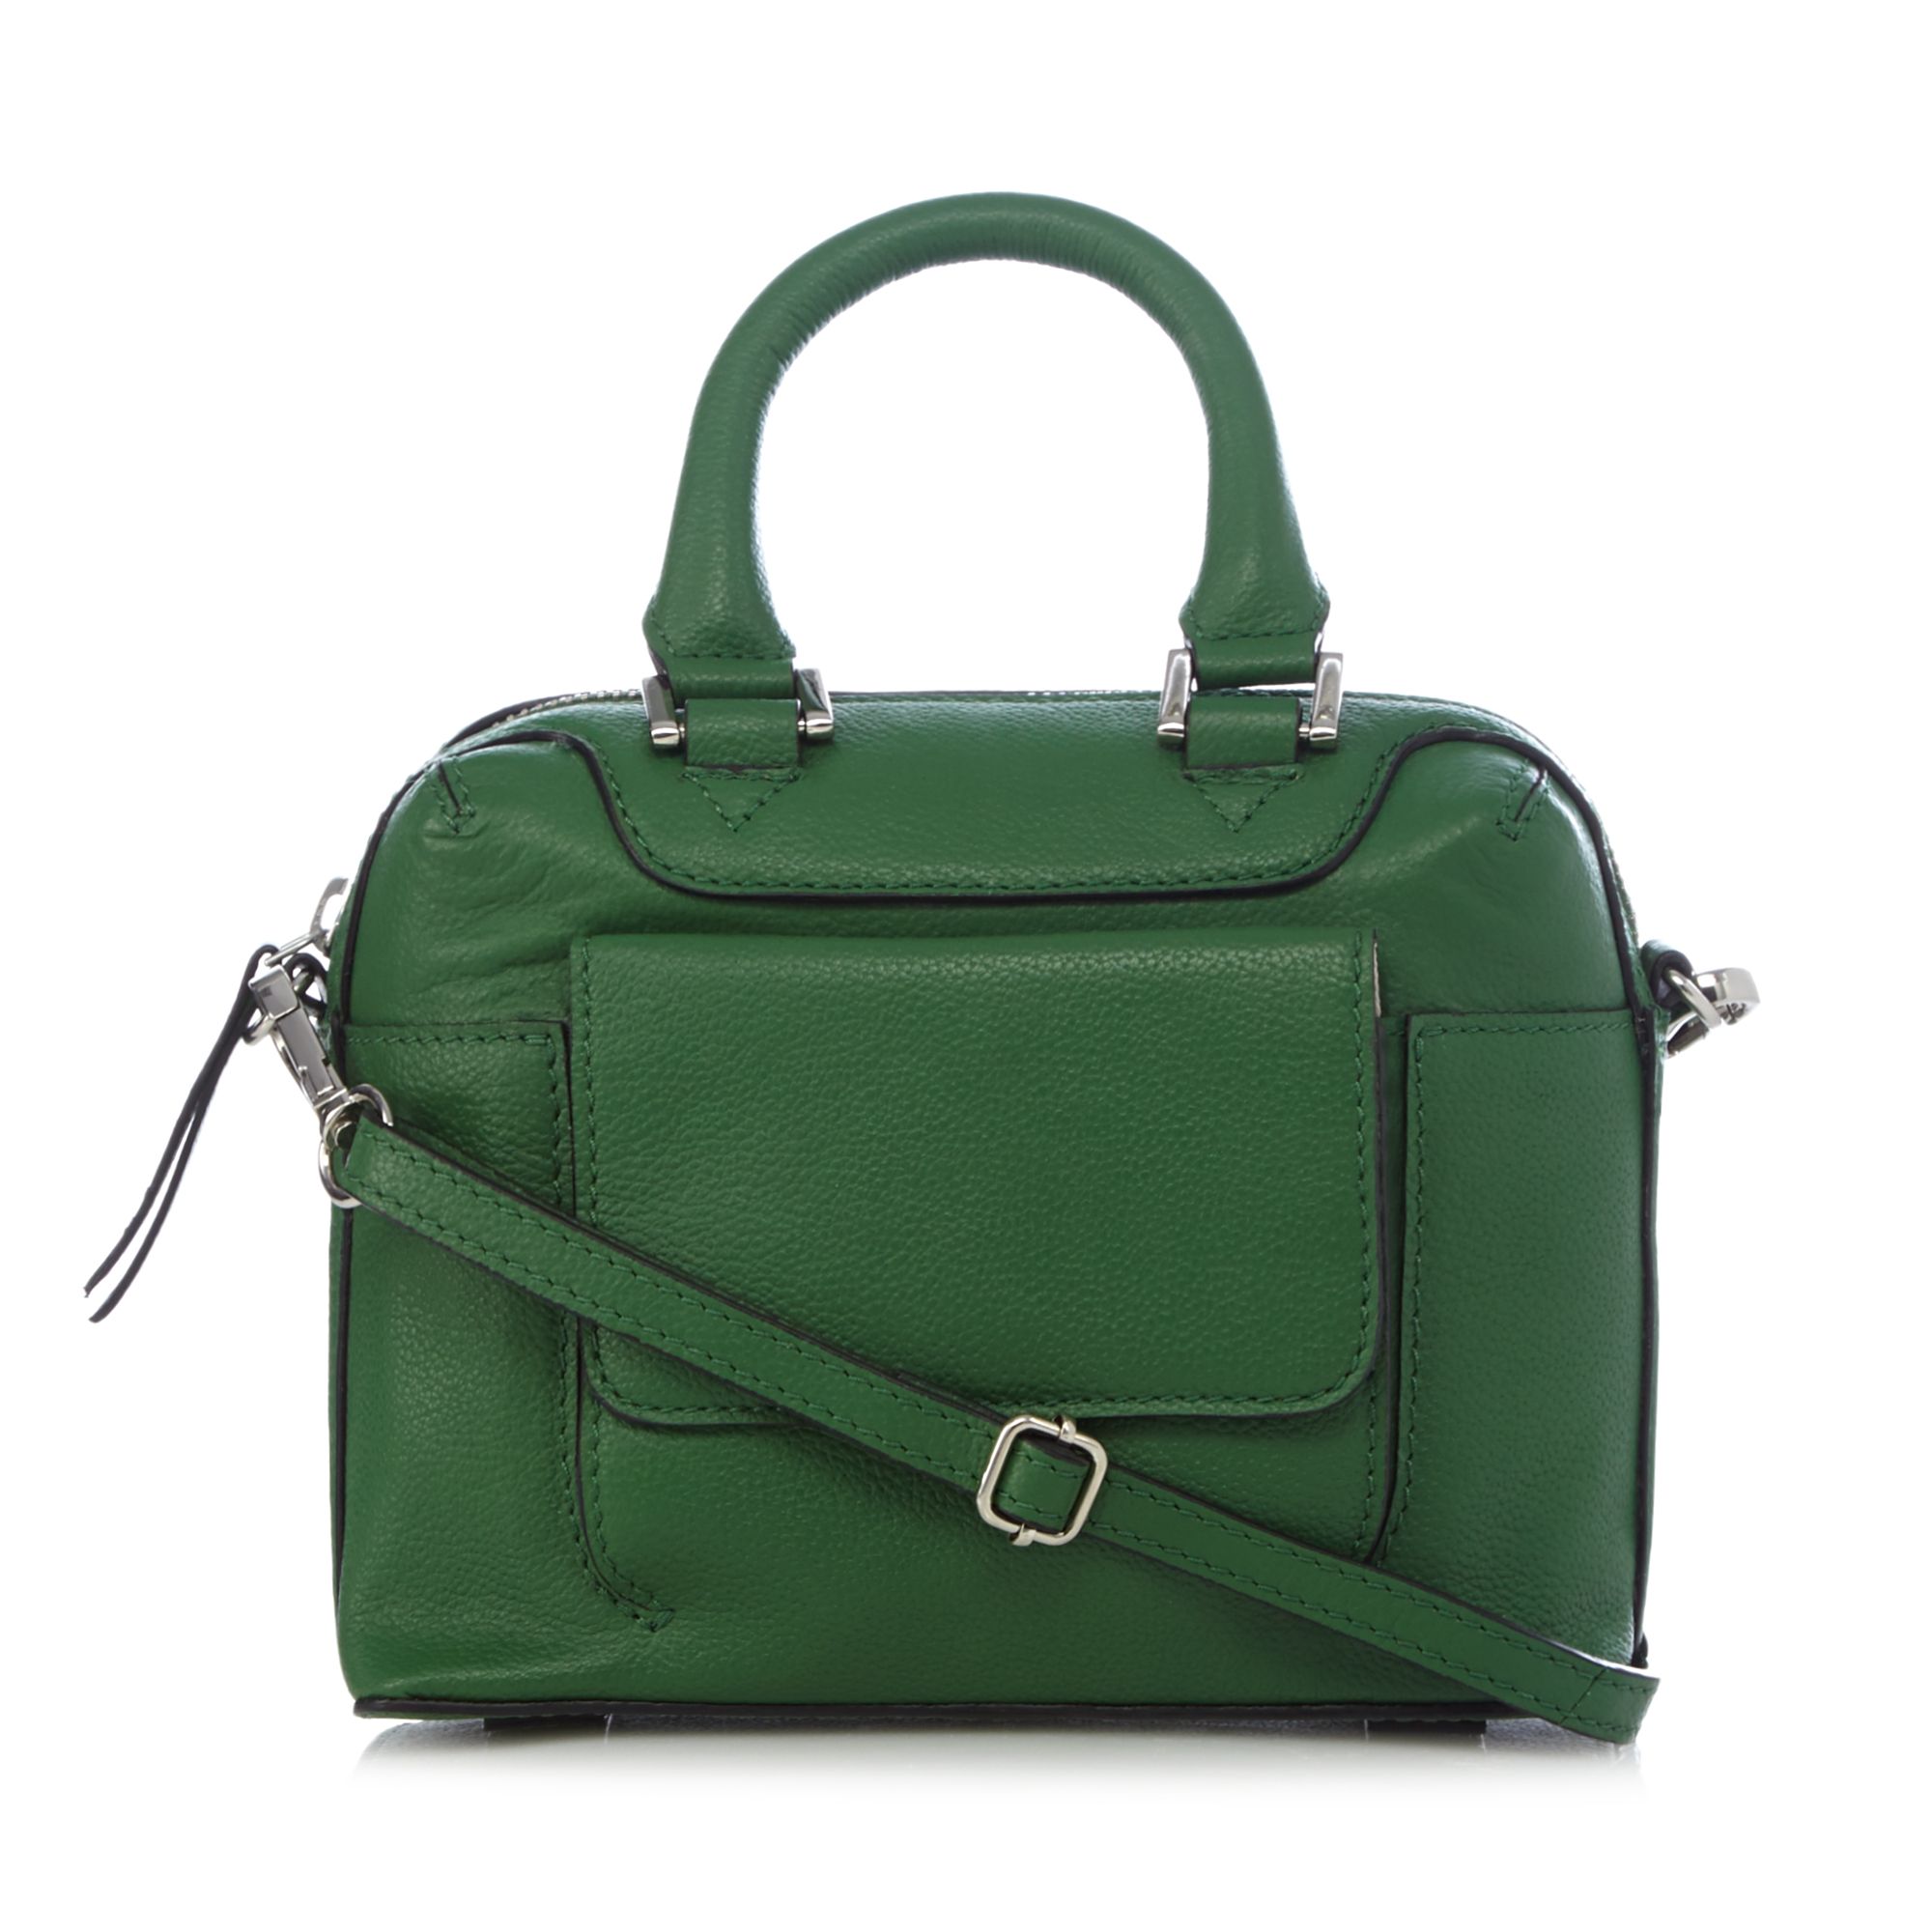 The Collection Womens Green Mini Leather Grab Bag From Debenhams | eBay